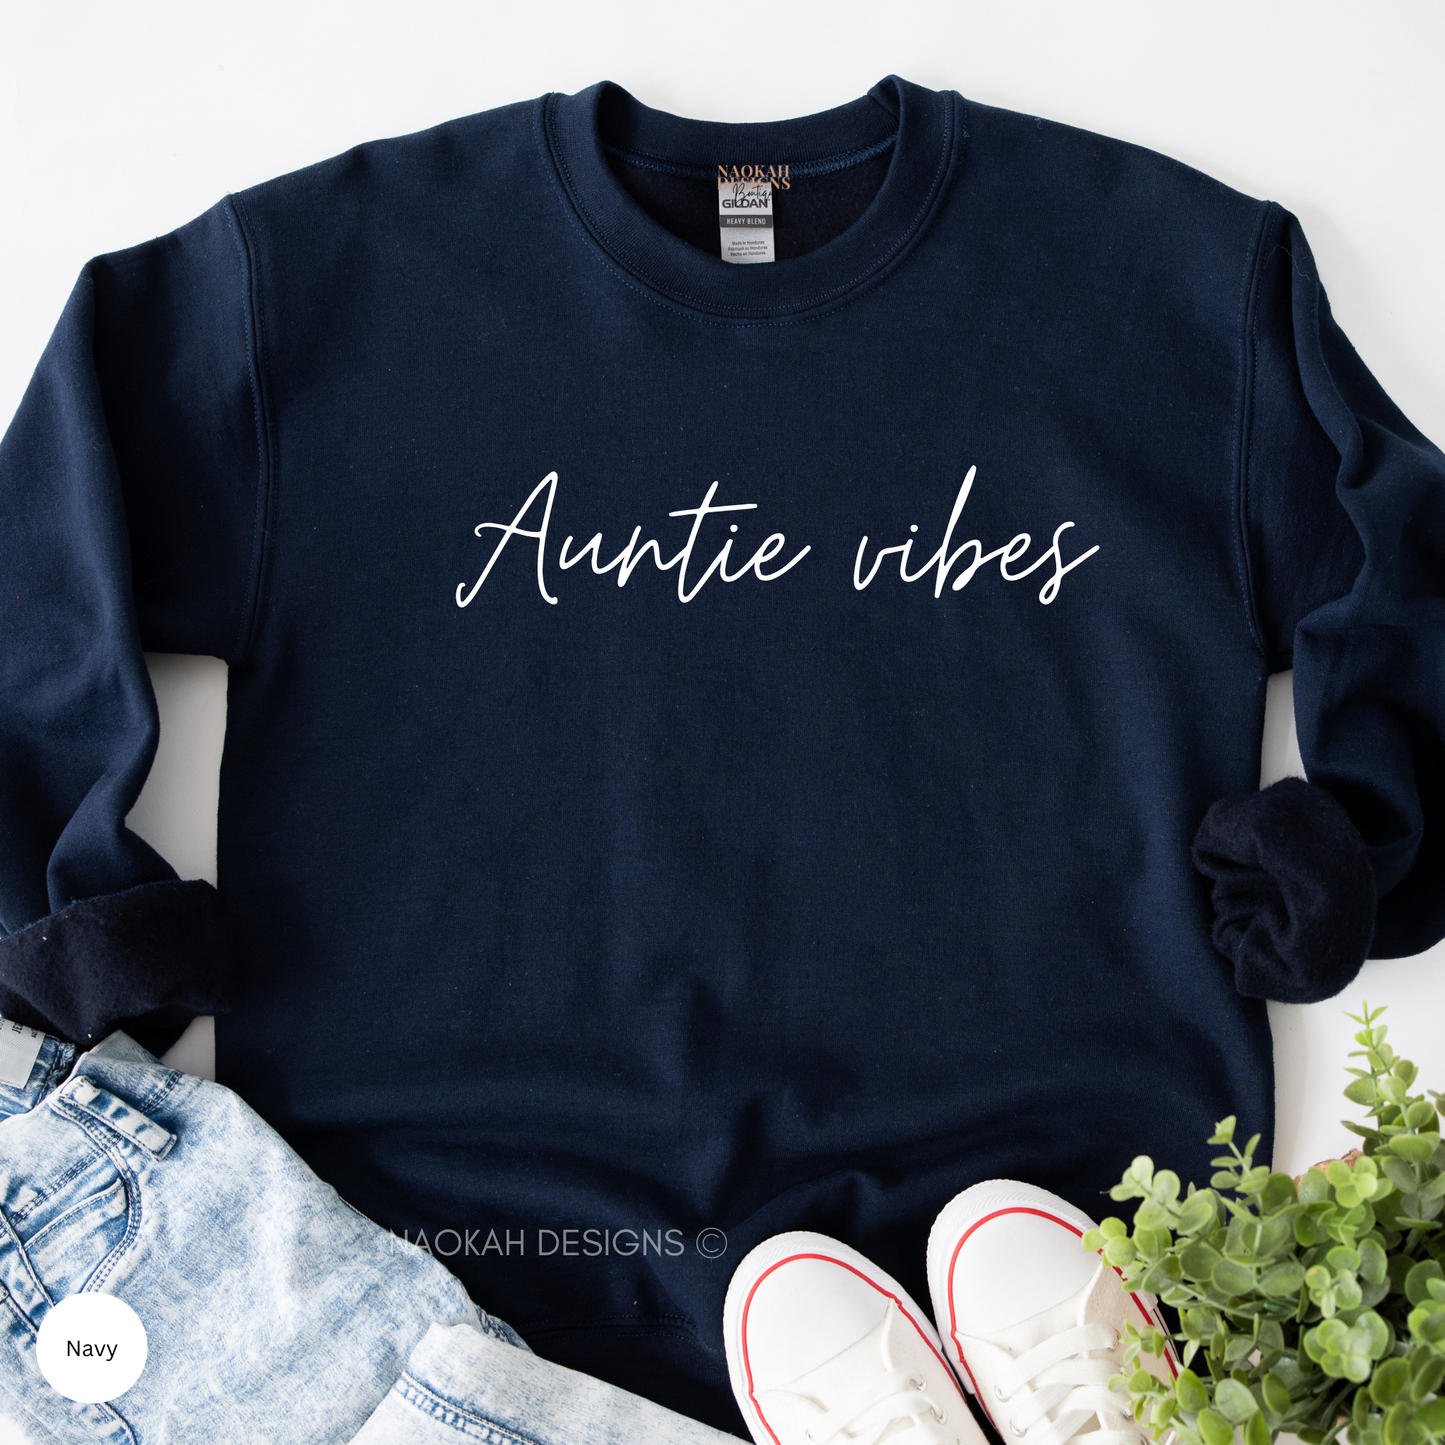 auntie vibes sweater, new aunt shirt, native auntie, metis auntie, inuit auntie, indigenous matriarch shirt, gift for sister, funtie shirt, deadly auntie, cool aunt club, aunticorn shirt, auntie shark shirt, auntiesaurus shirt, auntie bear shirt